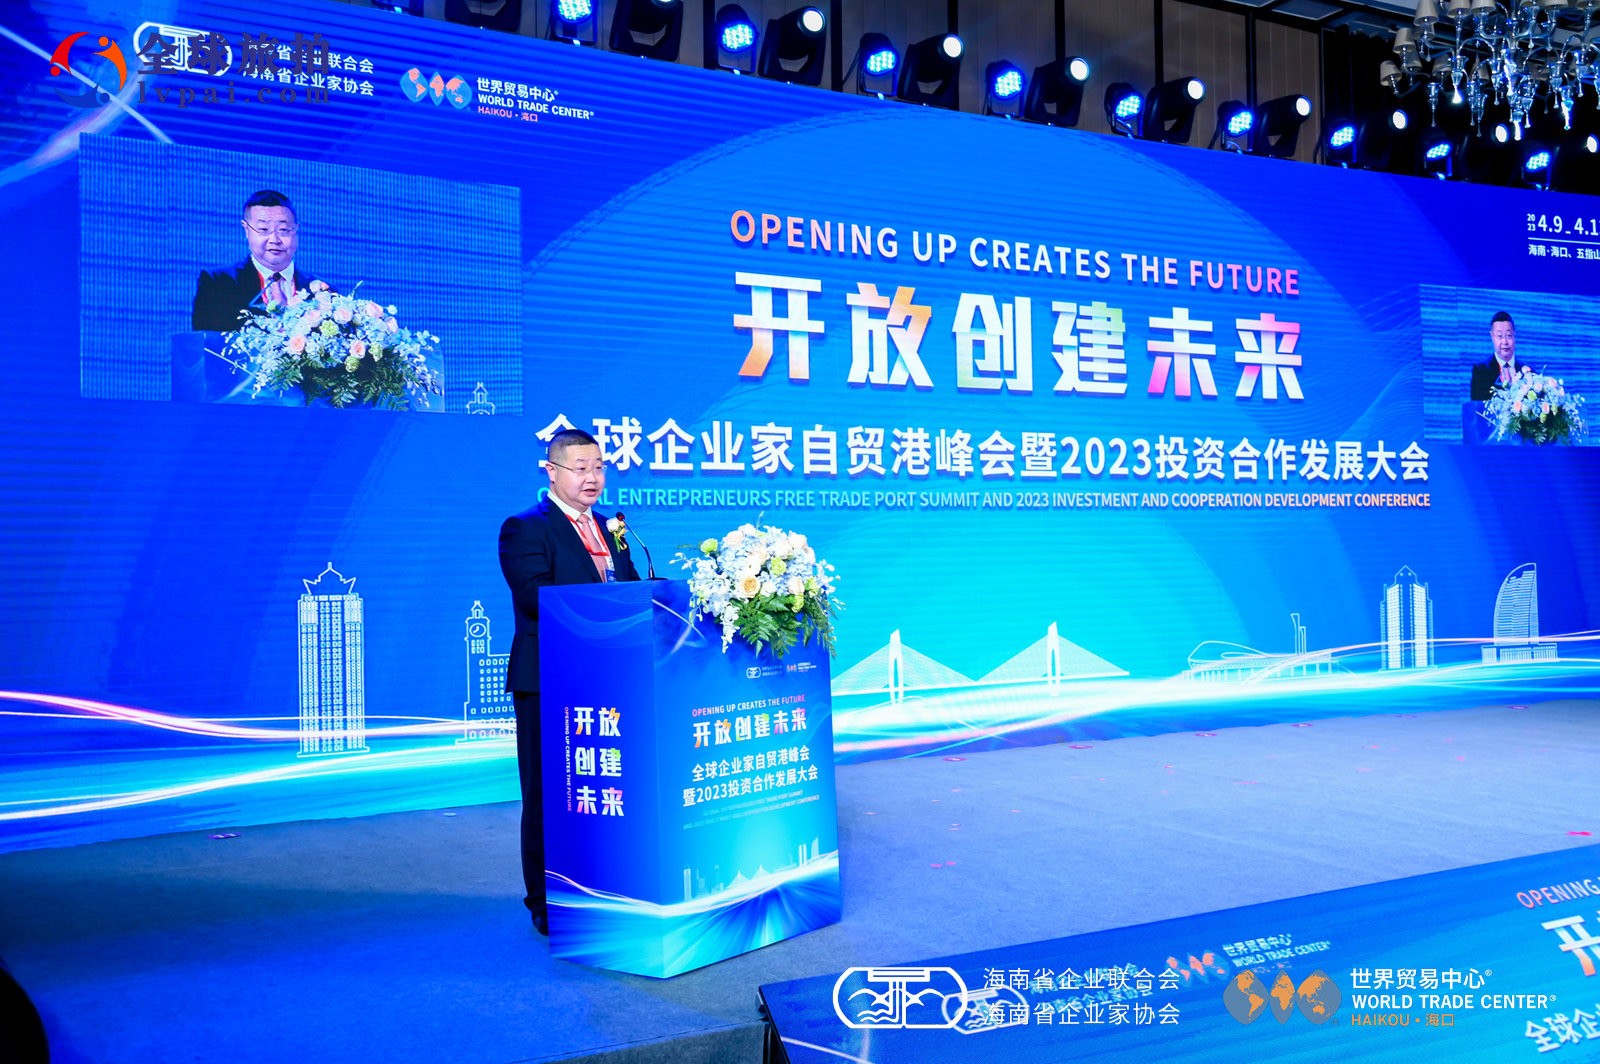 Layout of Free Trade Port and Integration of Double Circulation - Chairman Pi Yabin and his delegation were invited to attend the Global Entrepreneurs Free Trade Port Summit and 2023 Investment Cooperation Development Conference